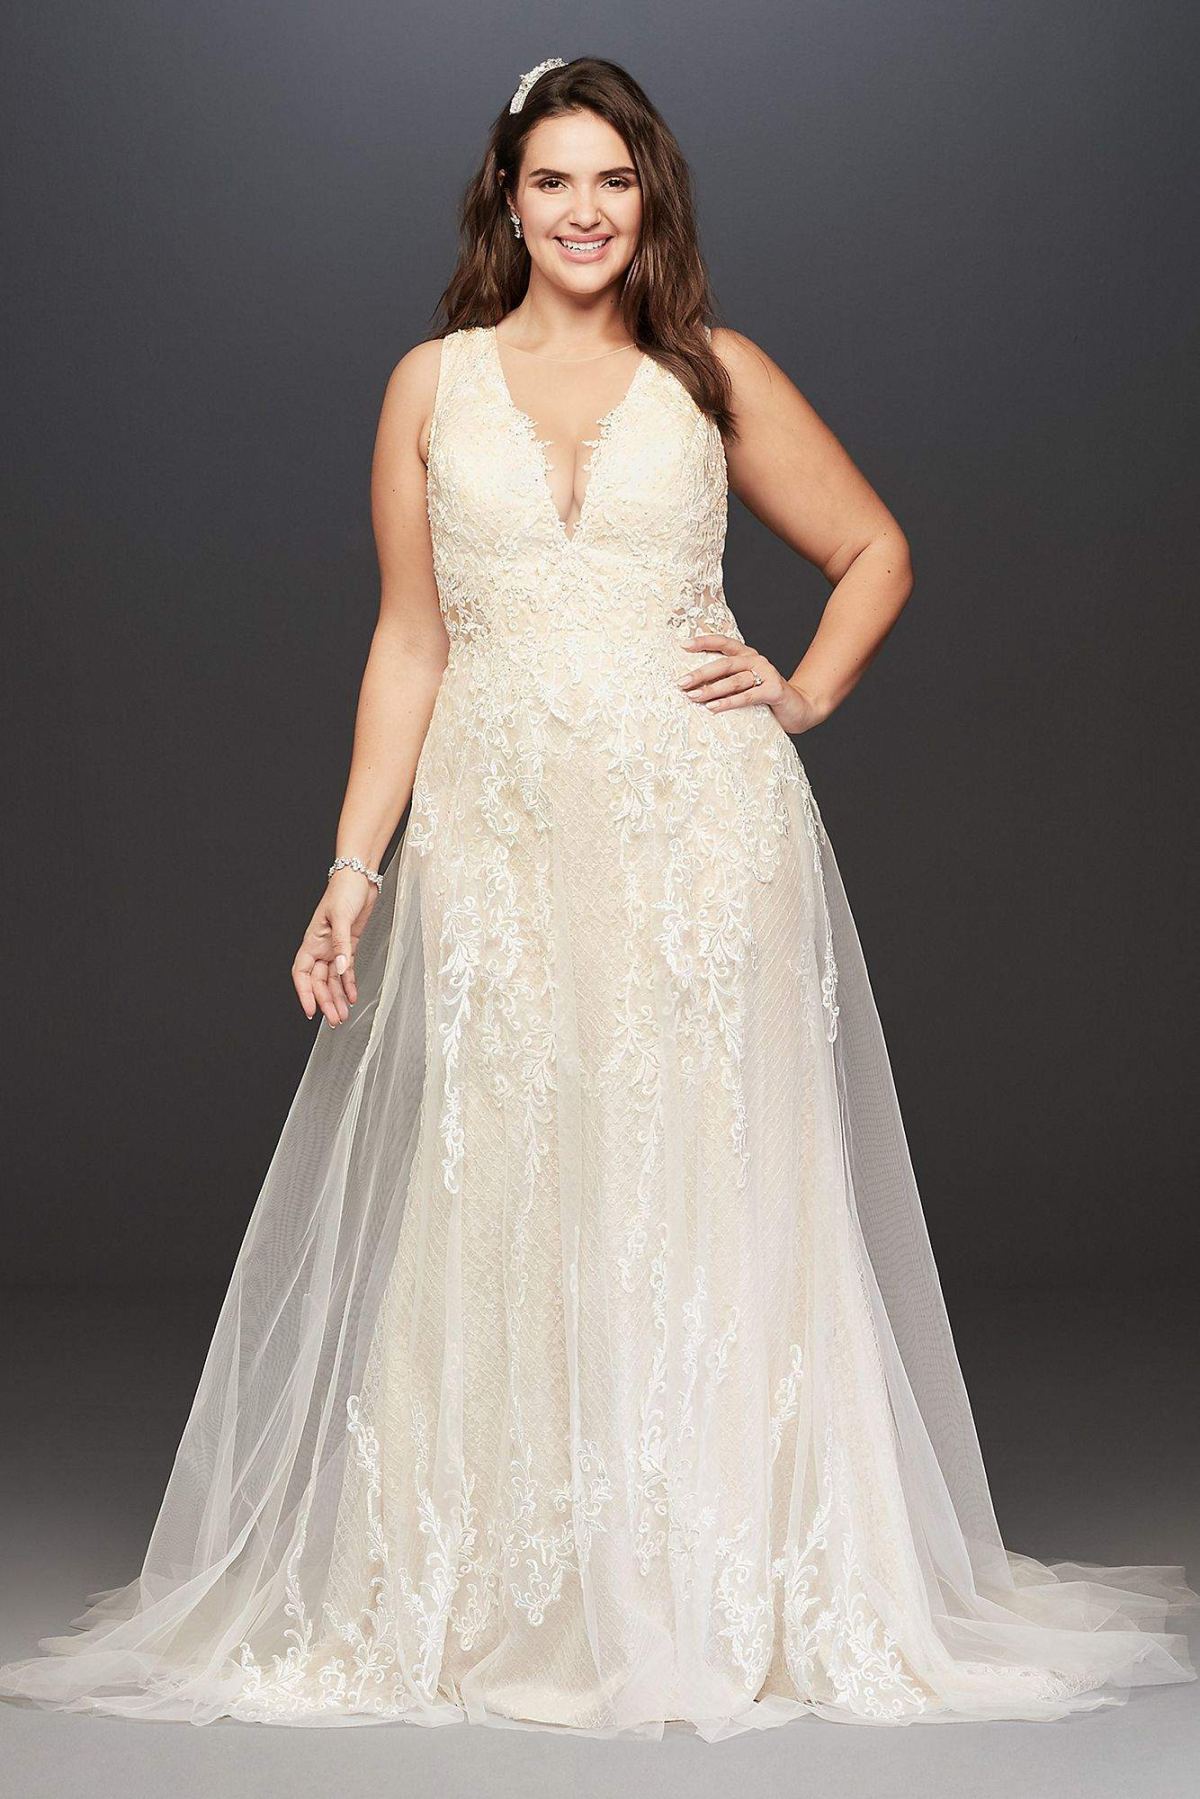 Tulle A-Line Plus Size Wedding Dress with V-Neck 9SWG722 [9SWG722